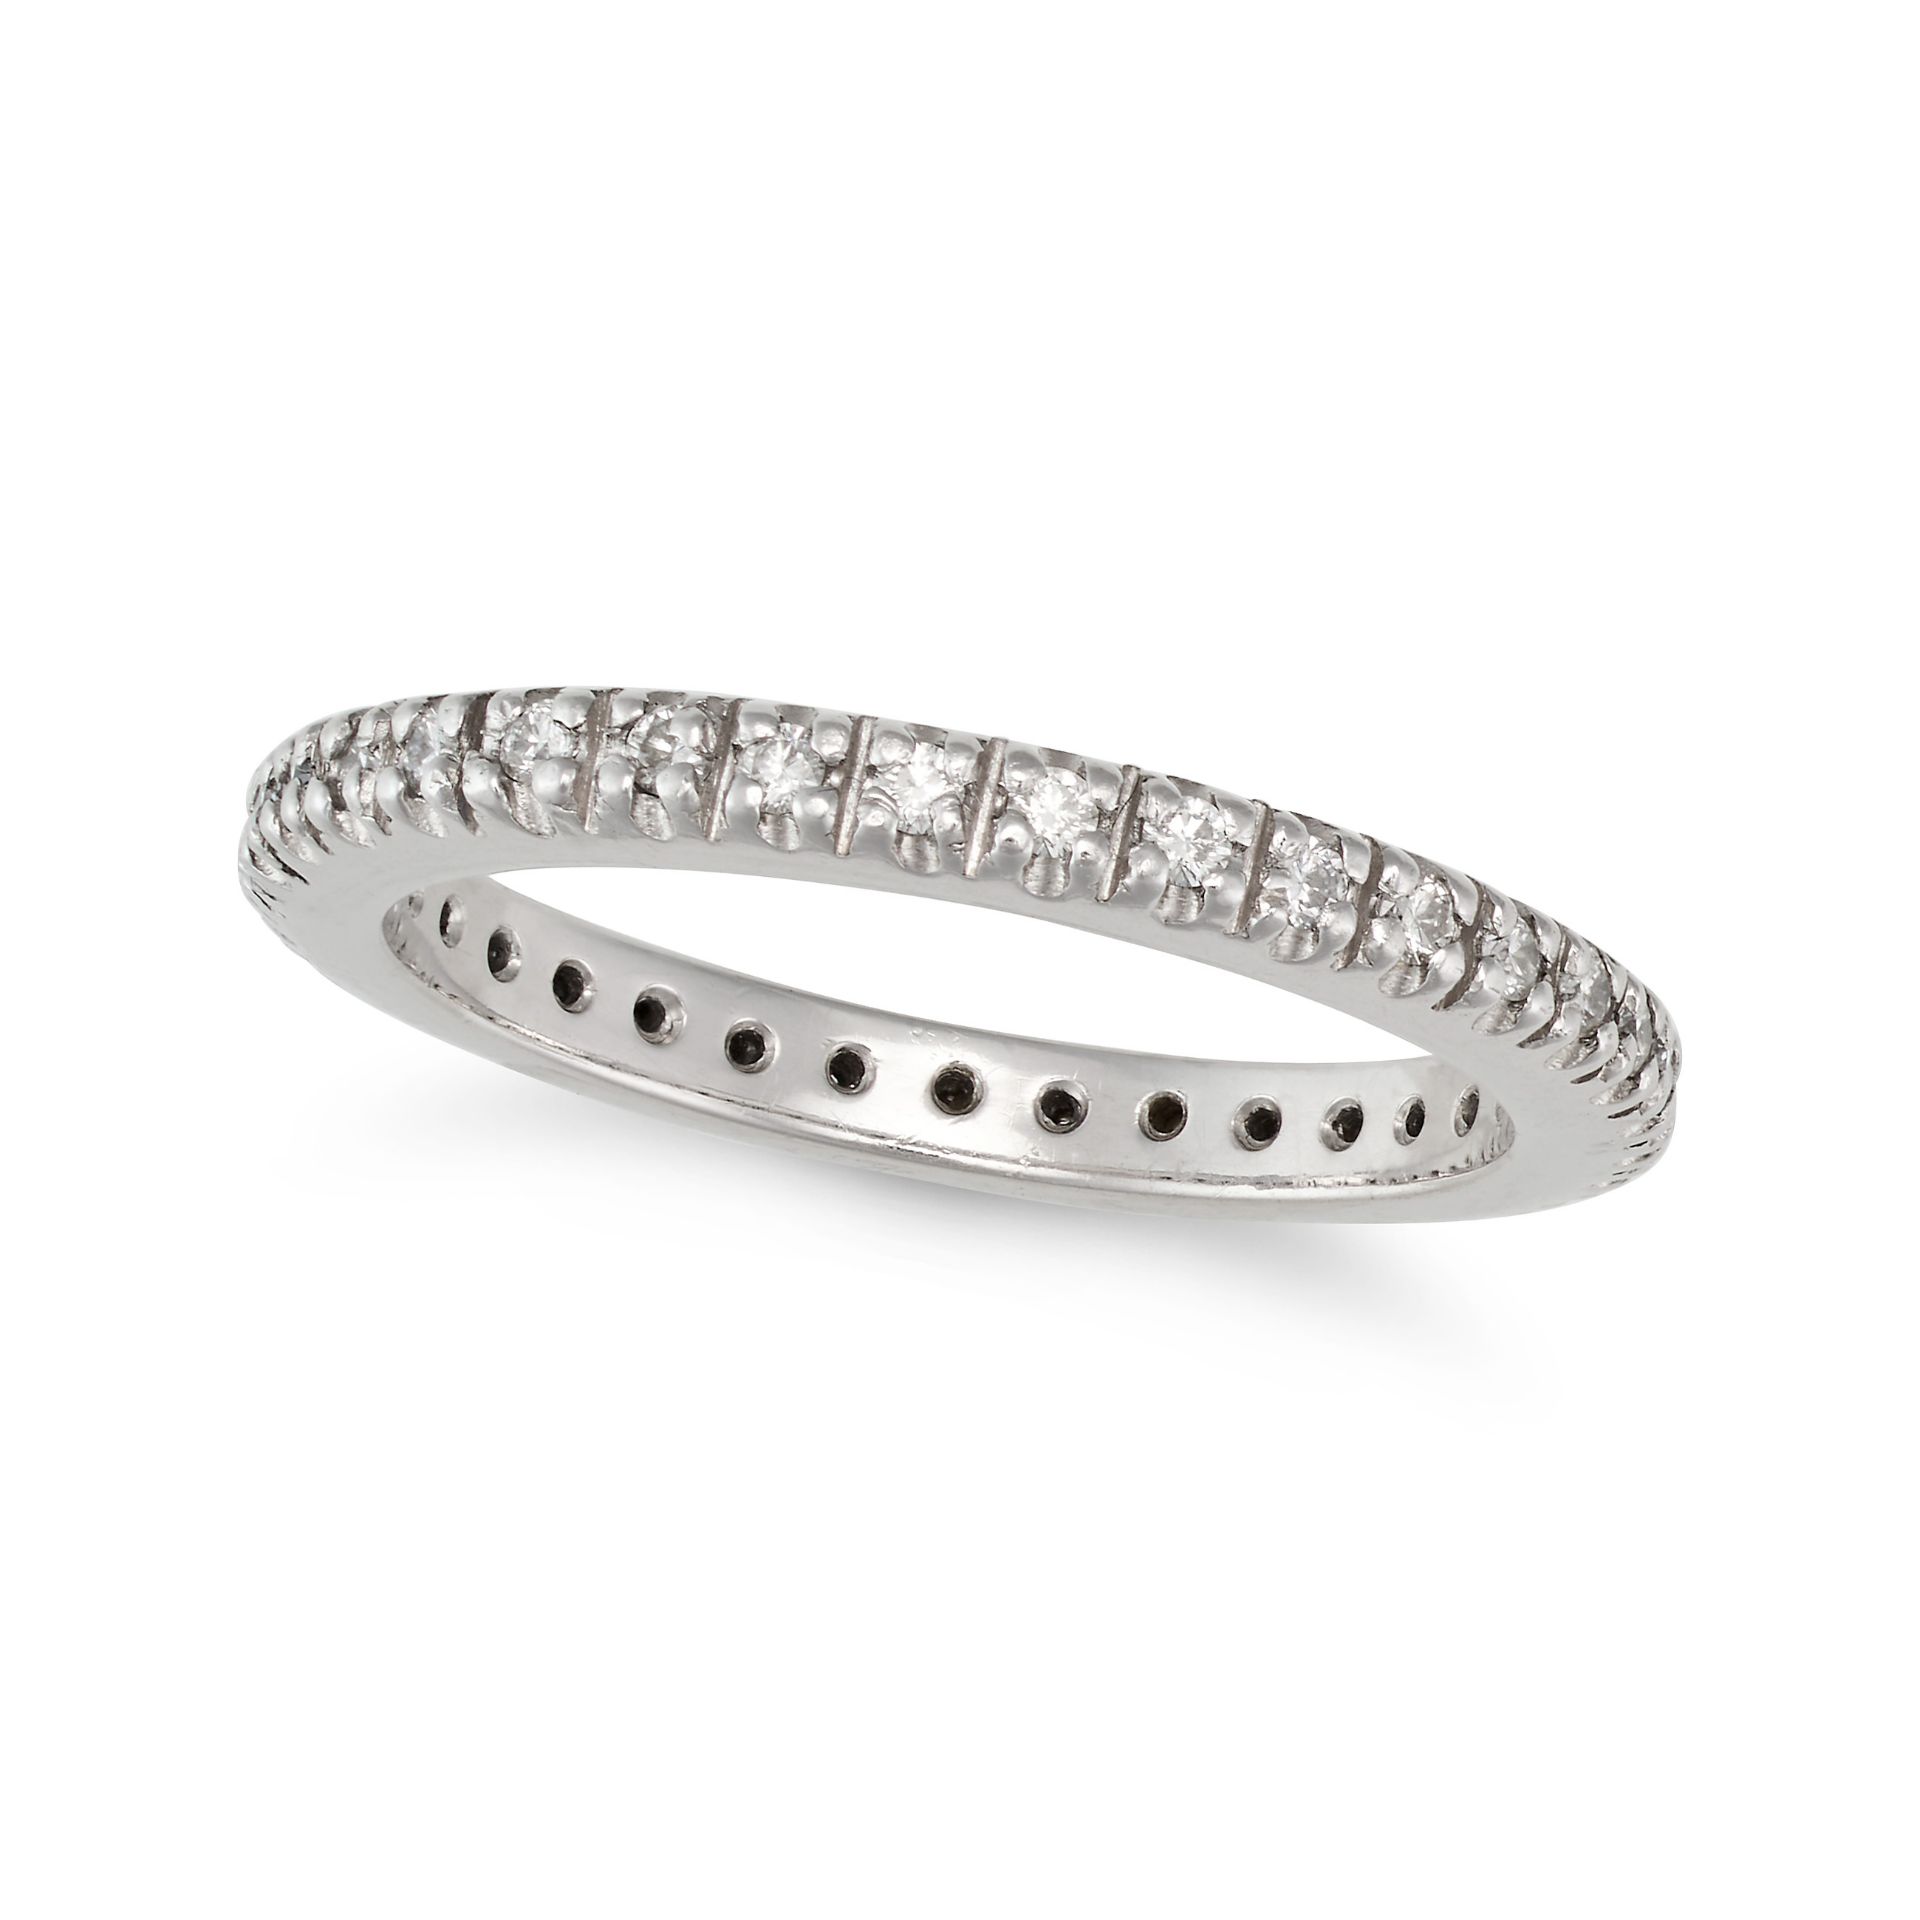 A DIAMOND ETERNITY RING in platinum, set all around with a row of round brilliant cut diamonds, s...